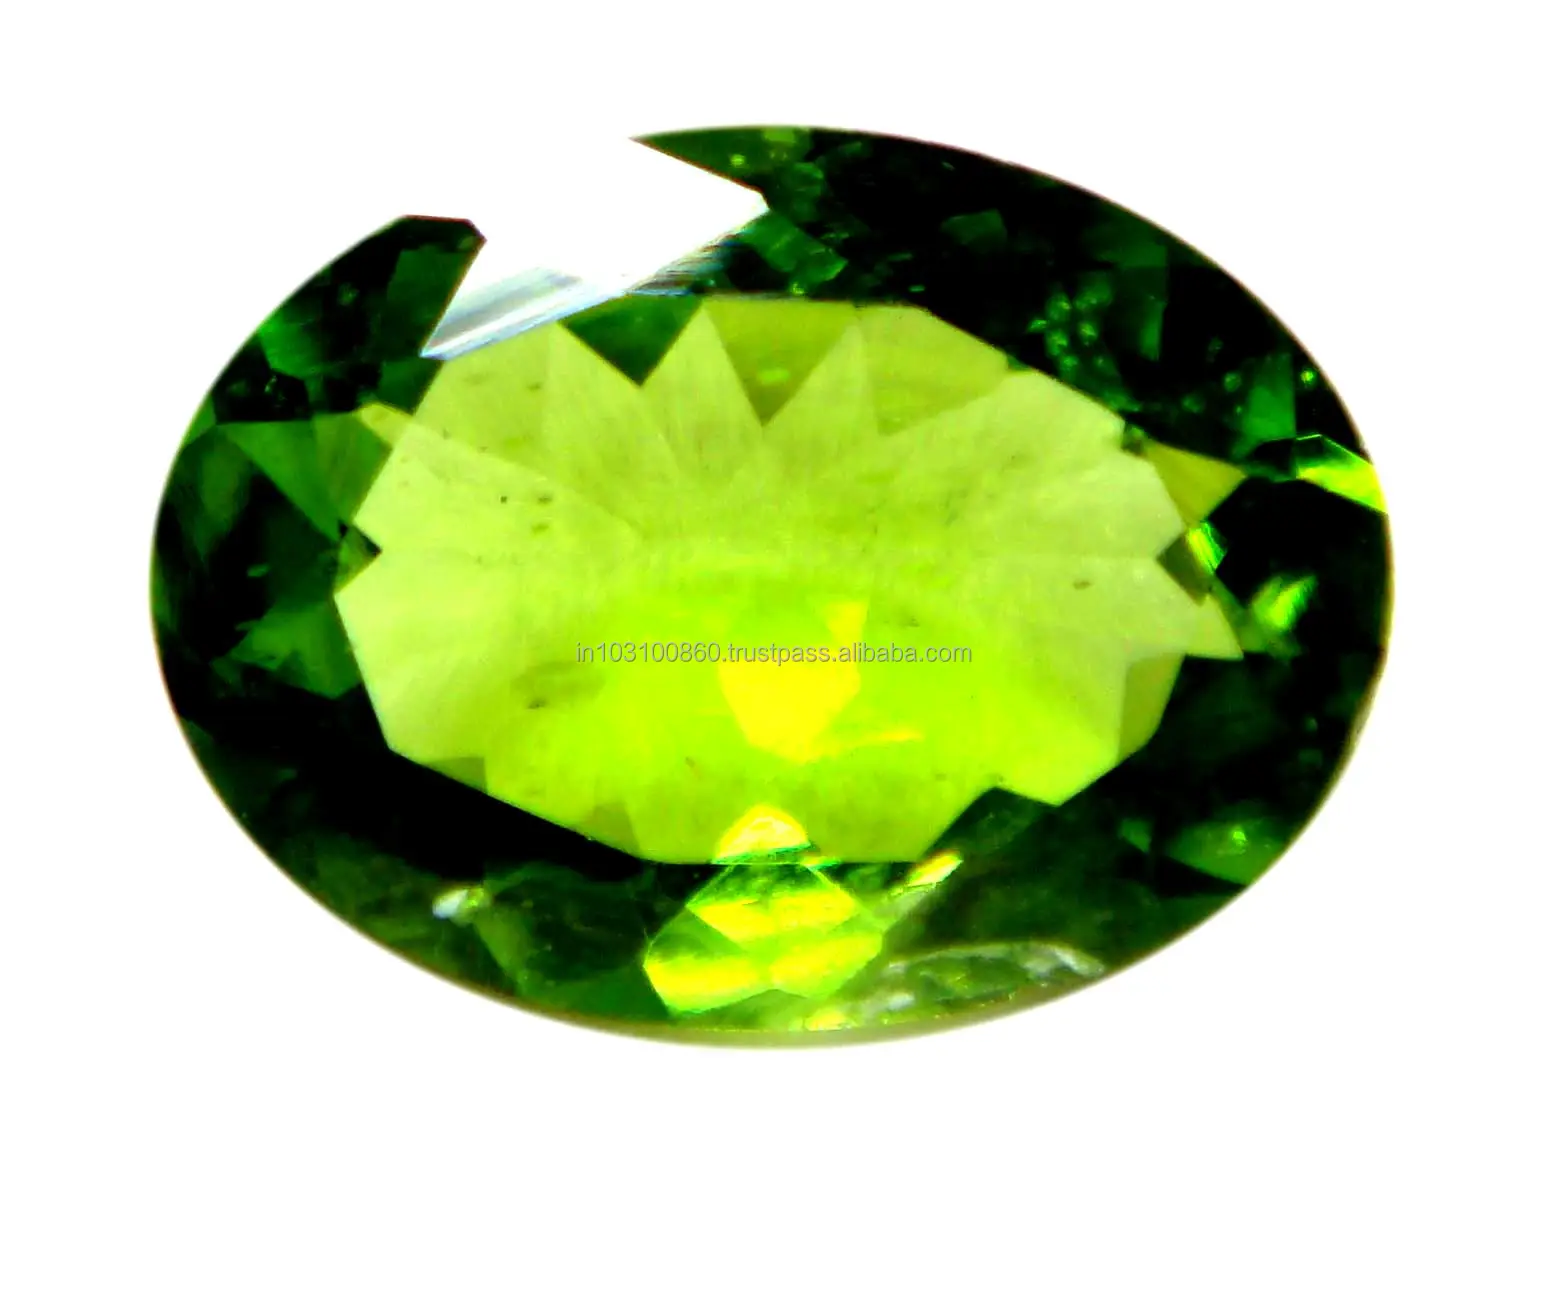 Oval Shape Natural Green Peridot Faceted Cut Finest Quality Calibrated 5x3mm 5x4mm Wholesale Genuine Gemstone Green Peridot